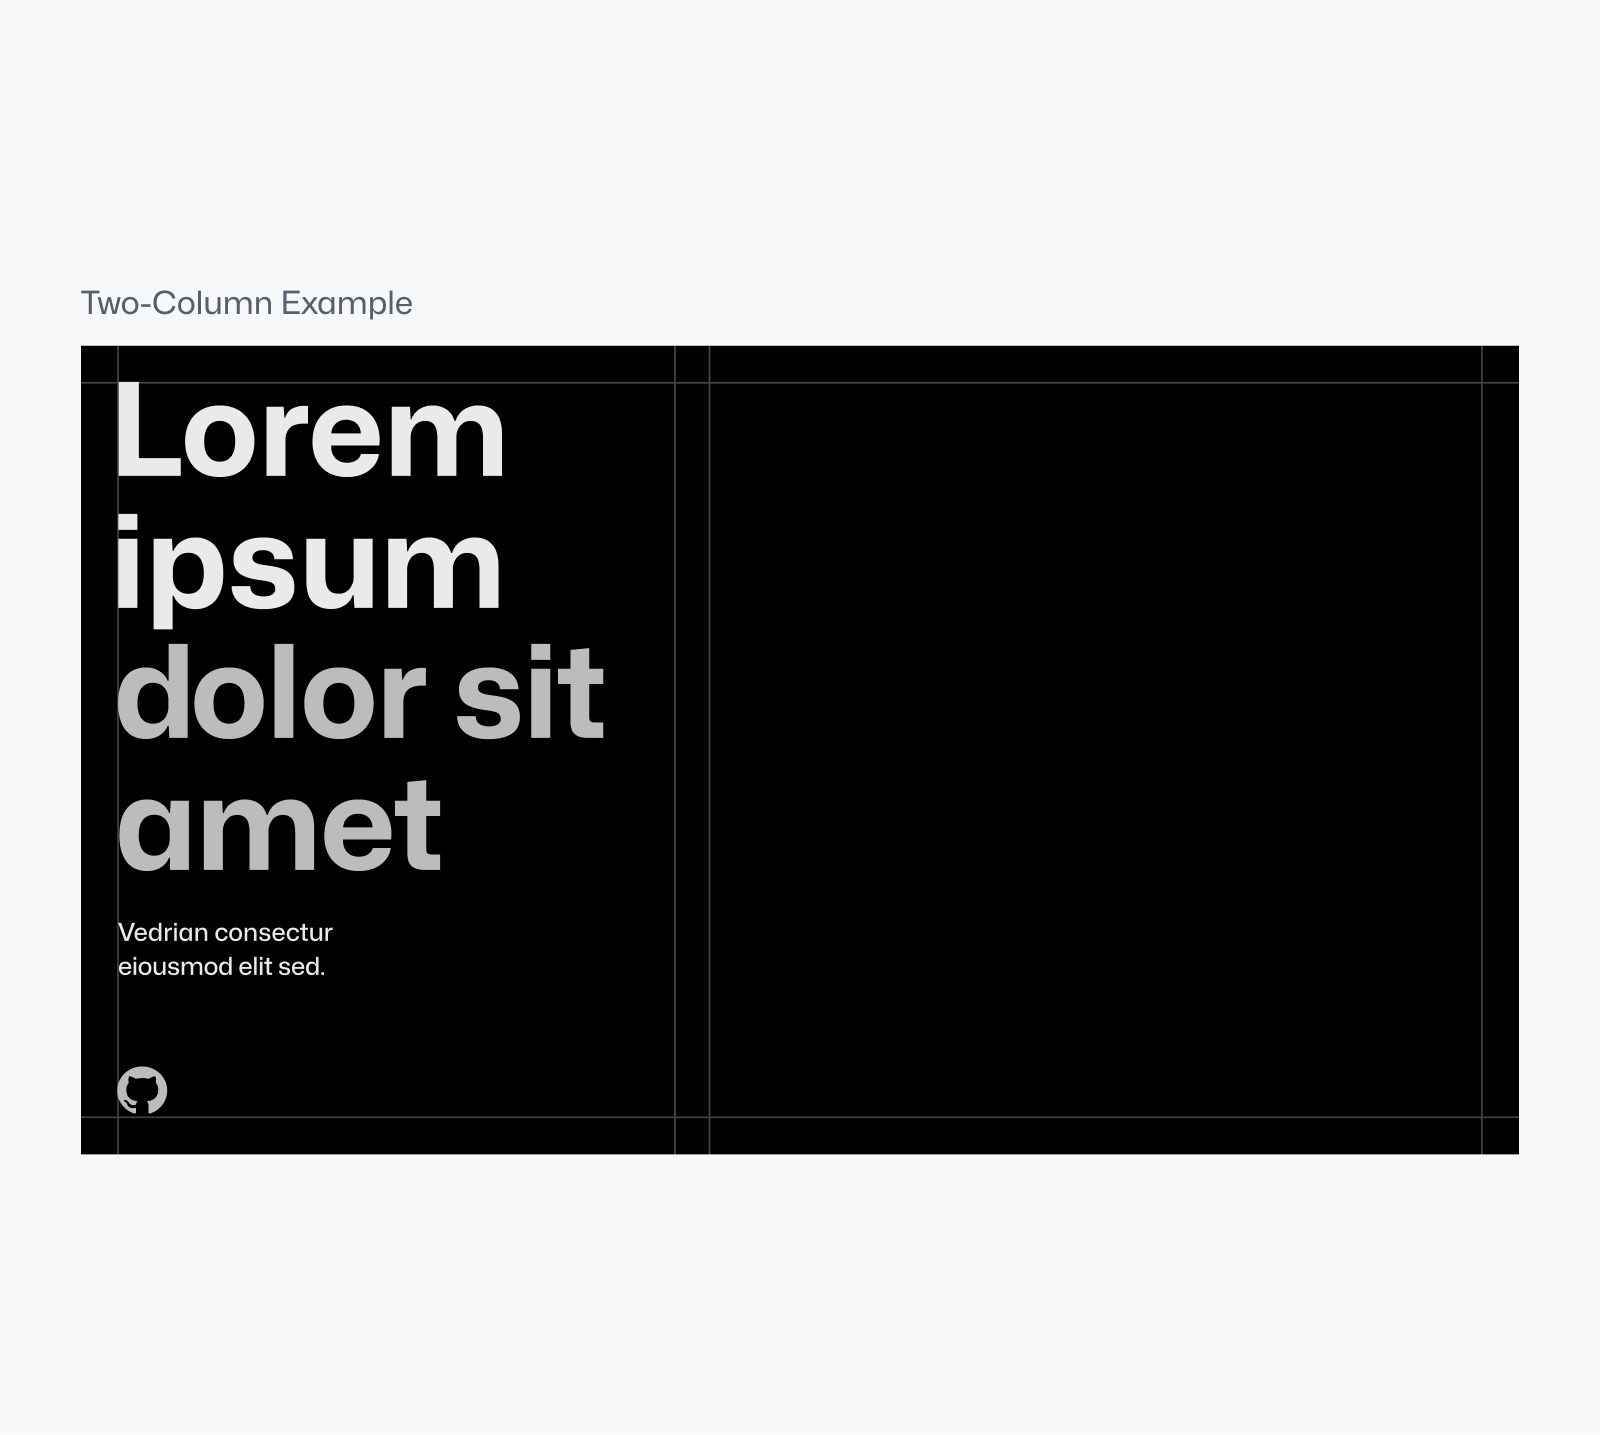 Text reading "Two-column example" sits above a black rectangle containing large headline placeholder lorem ipsum text set on the left side of the composition. Two lines of smaller placeholder text are underneat, followed by an invertocat logo. The composition is outlined by light gray grid lines.